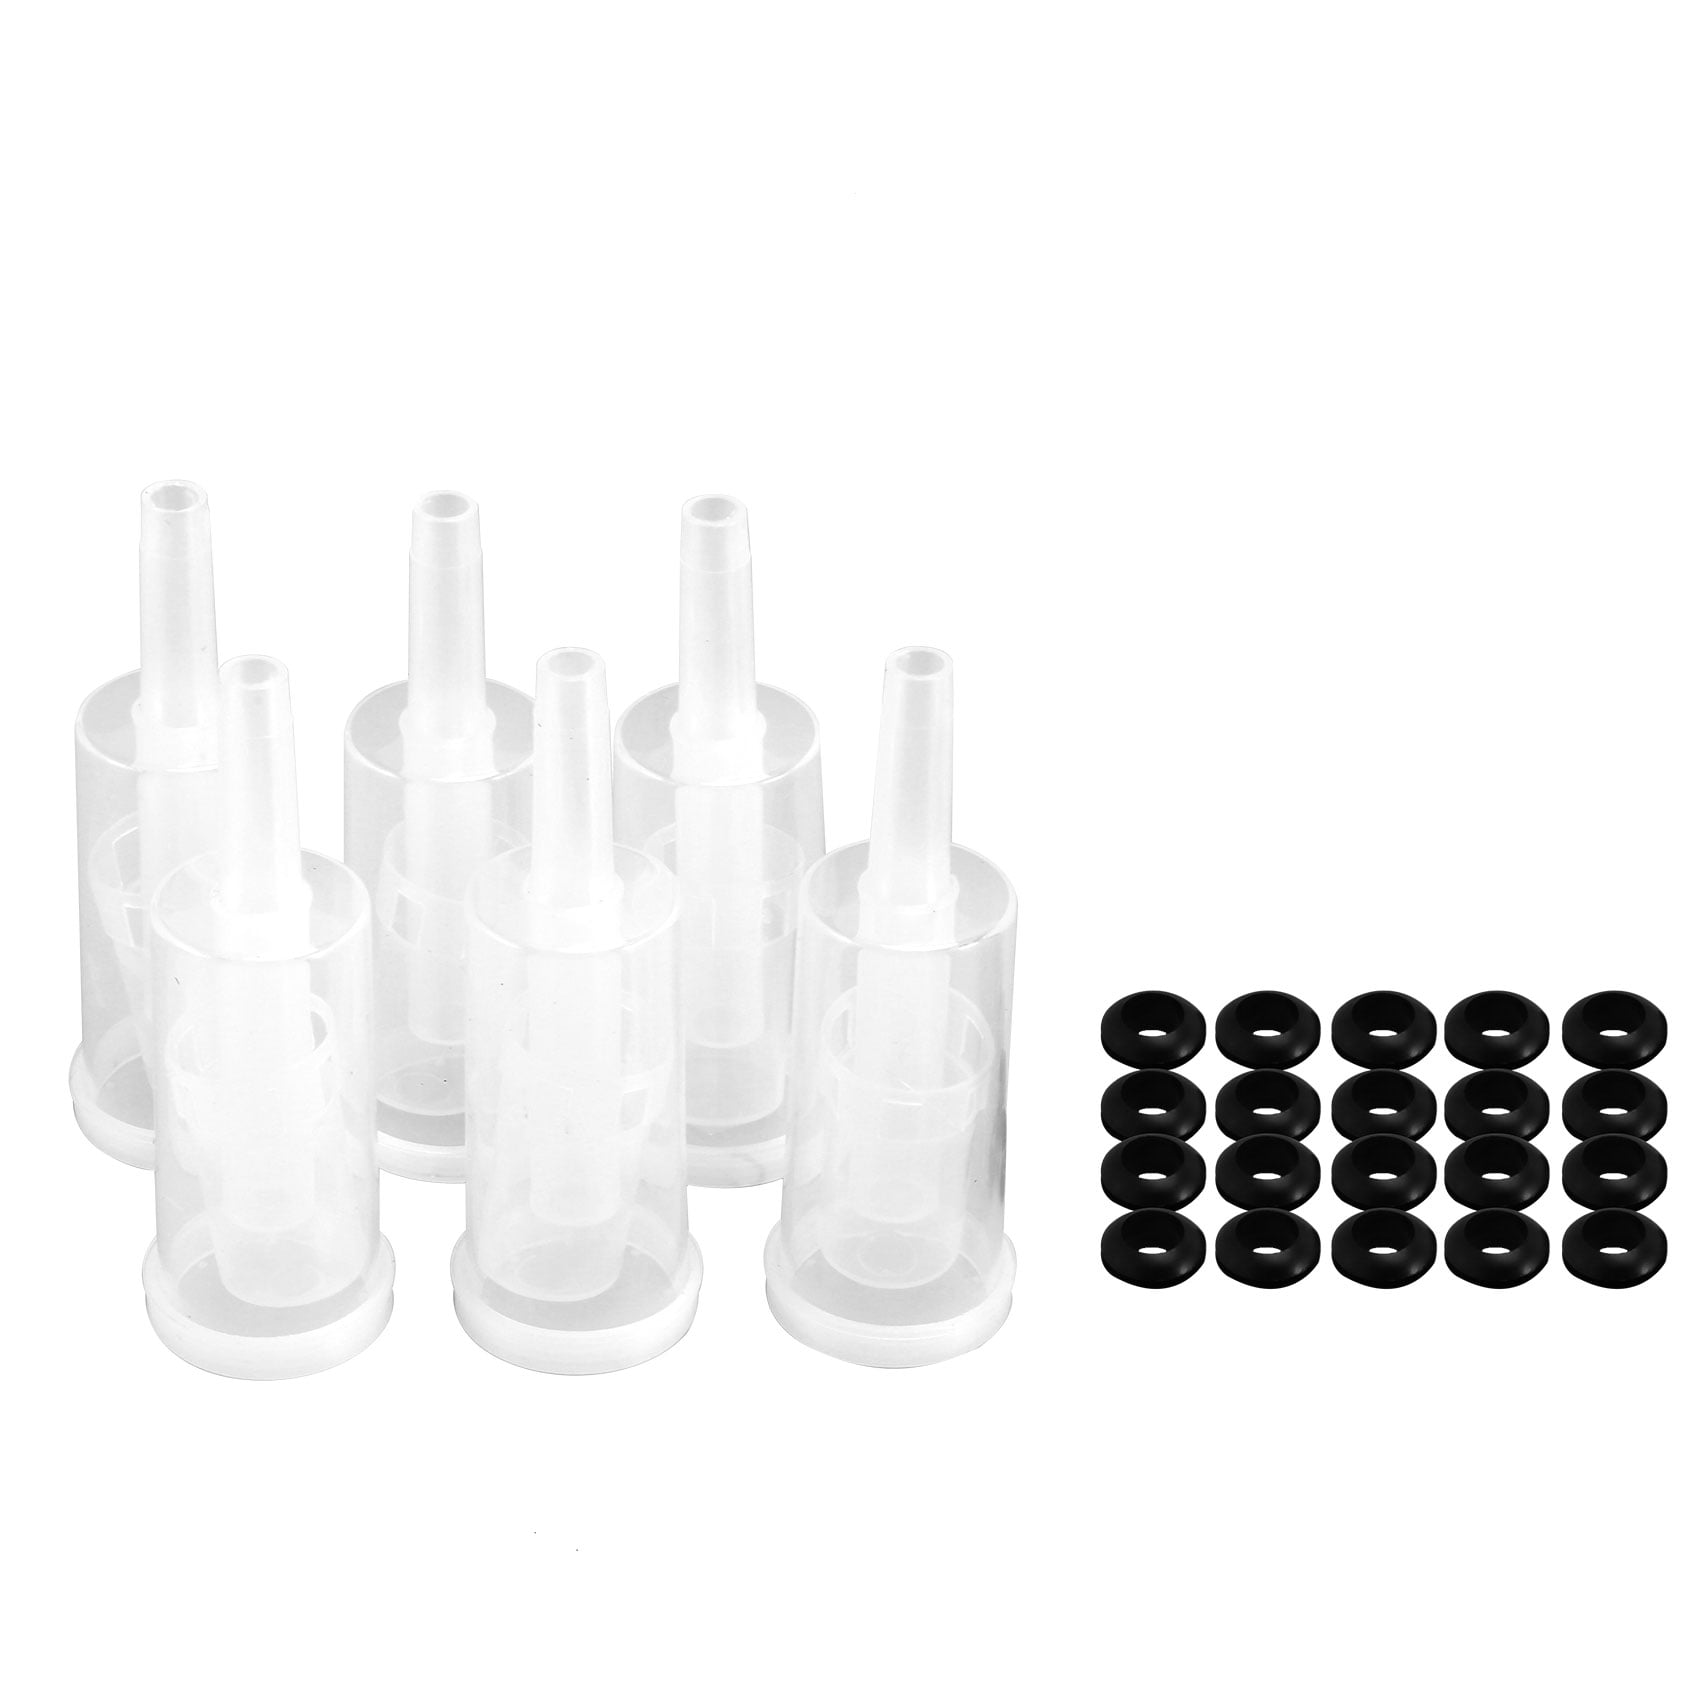 Brewing Kimchi Making Wine Airlock Set for Fermentation 20 Pieces Silicone Grommets and 6 Pieces Airlocks Kit for Preserving Fermenting Sauerkraut 